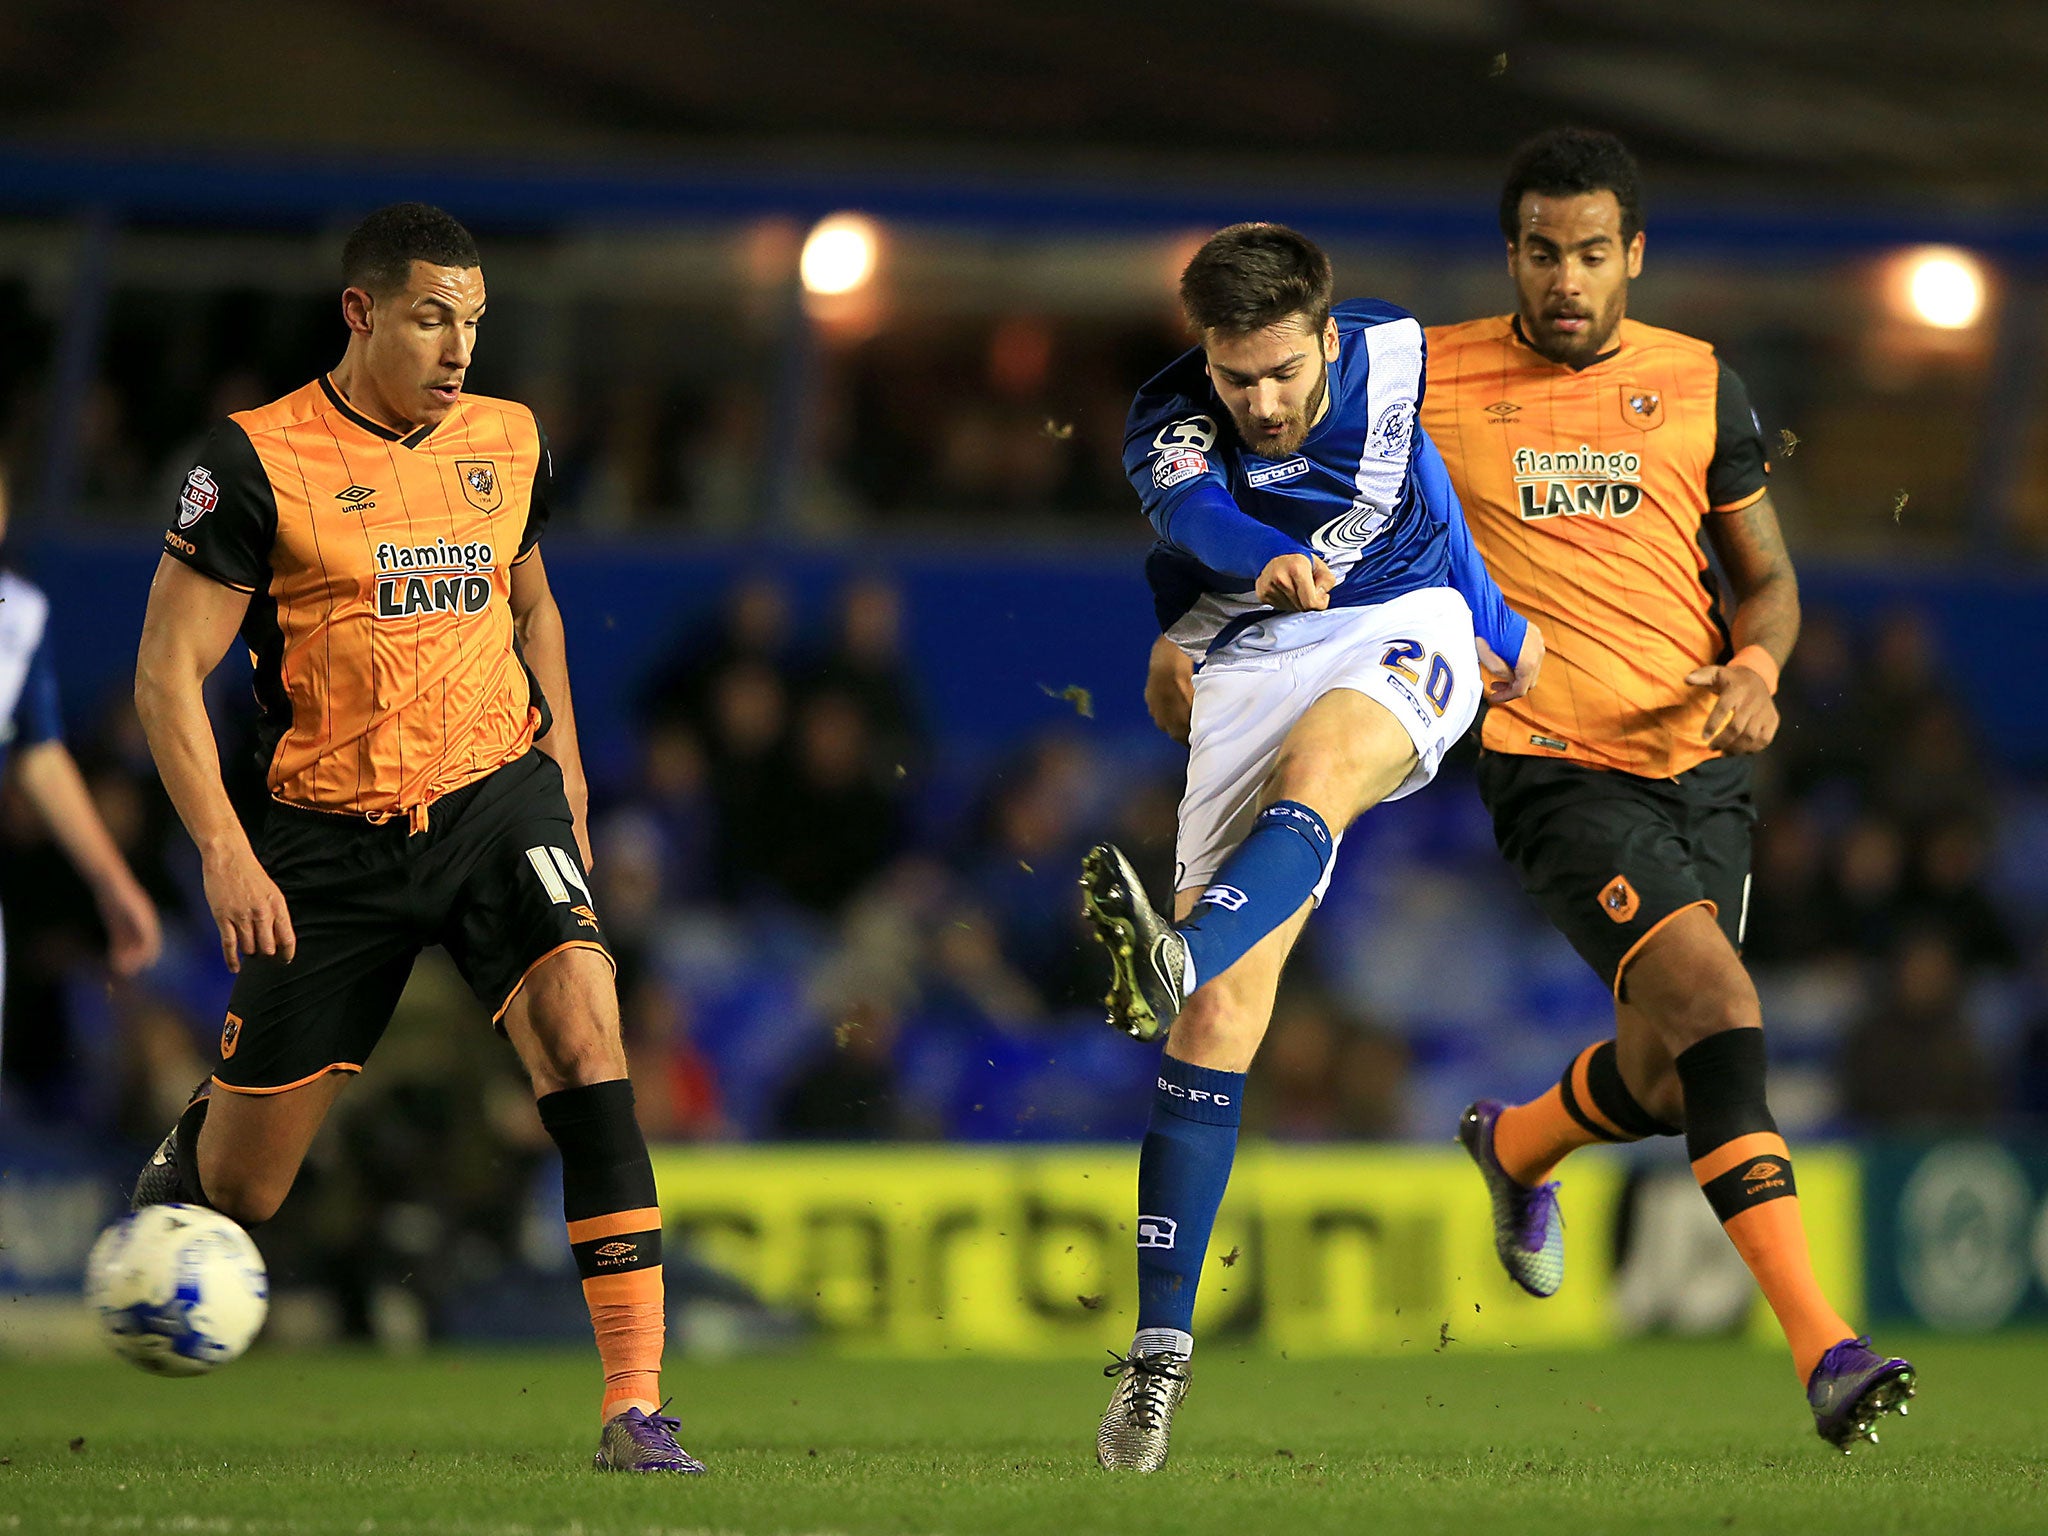 Jon Toral, the Spanish forward on loan from Arsenal, scored his seventh league goal of the season